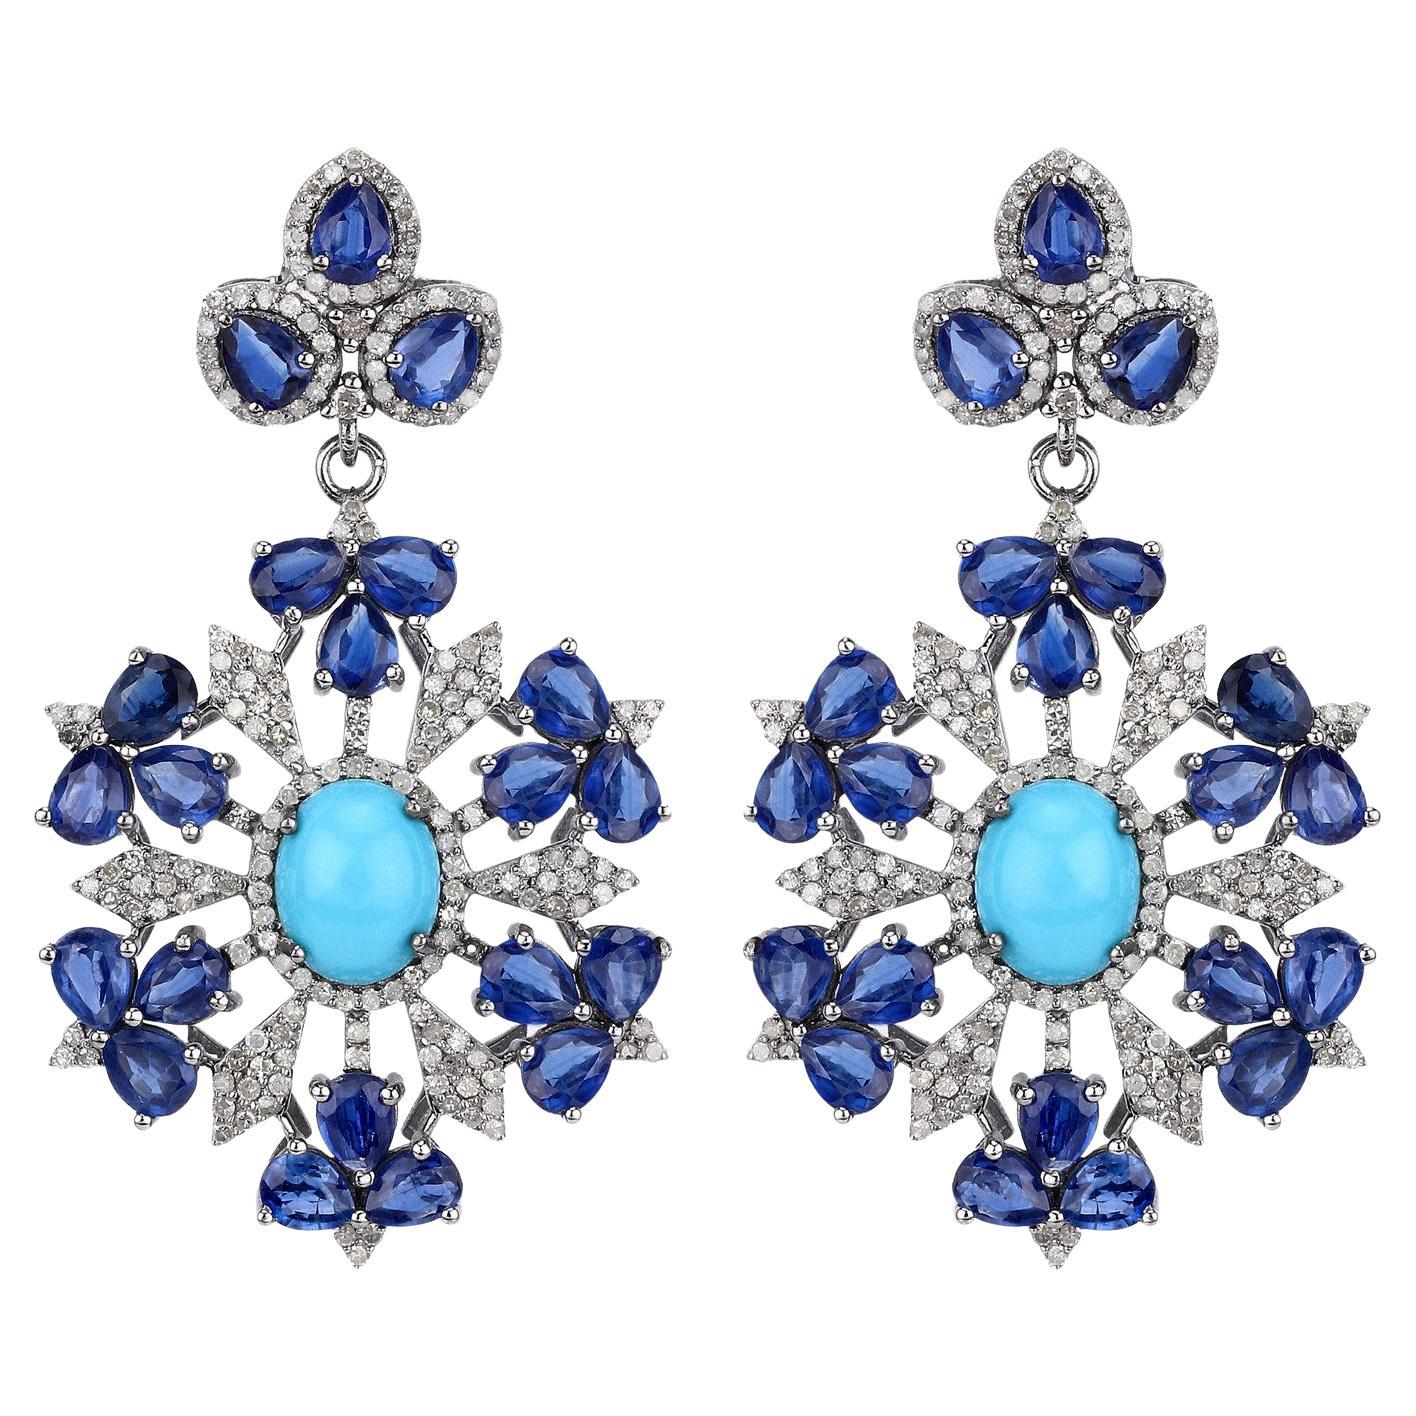 Natural Multicolor Gemstone Statement Earrings Set with Diamonds